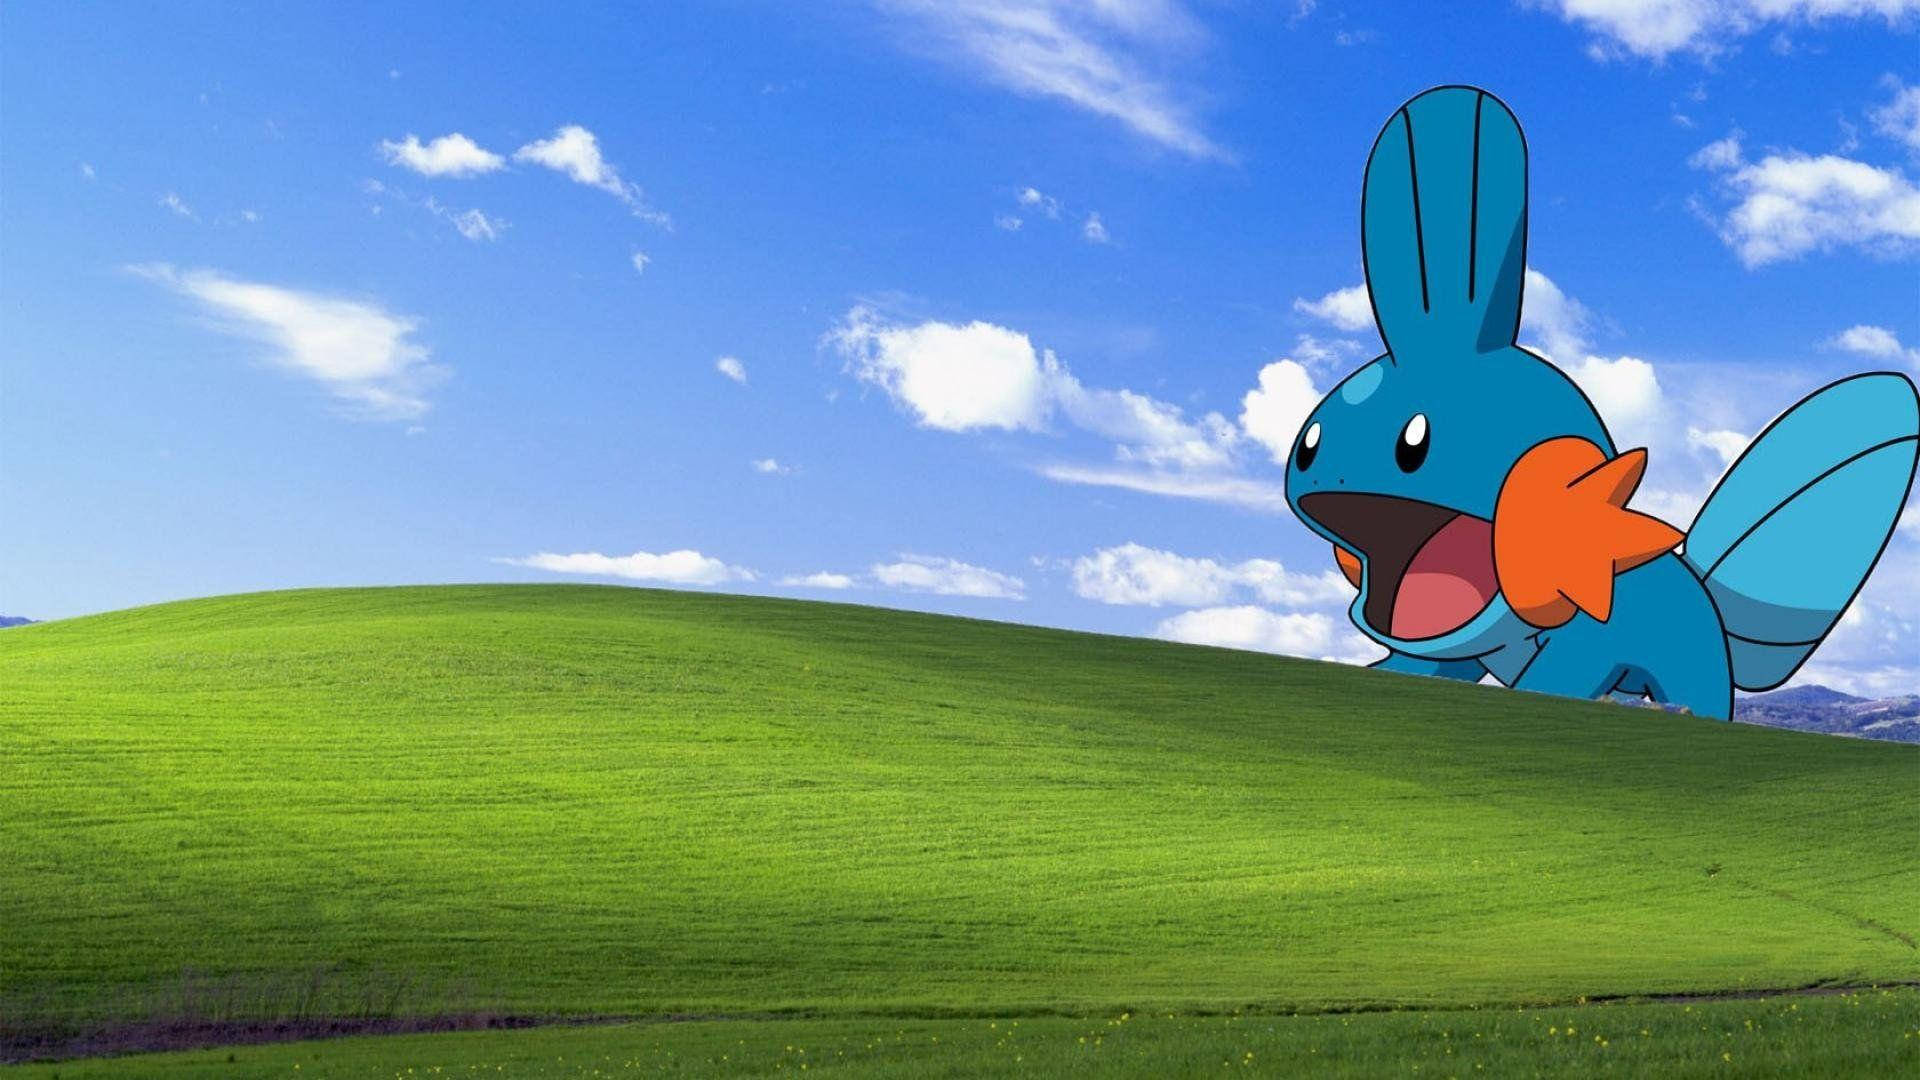 Windowsxp Mudkip Refers To A Computer Or Mobile Wallpaper That Features The Mudkip Character From The Pokémon Franchise With A Windows Xp Aesthetic. Fondo de pantalla